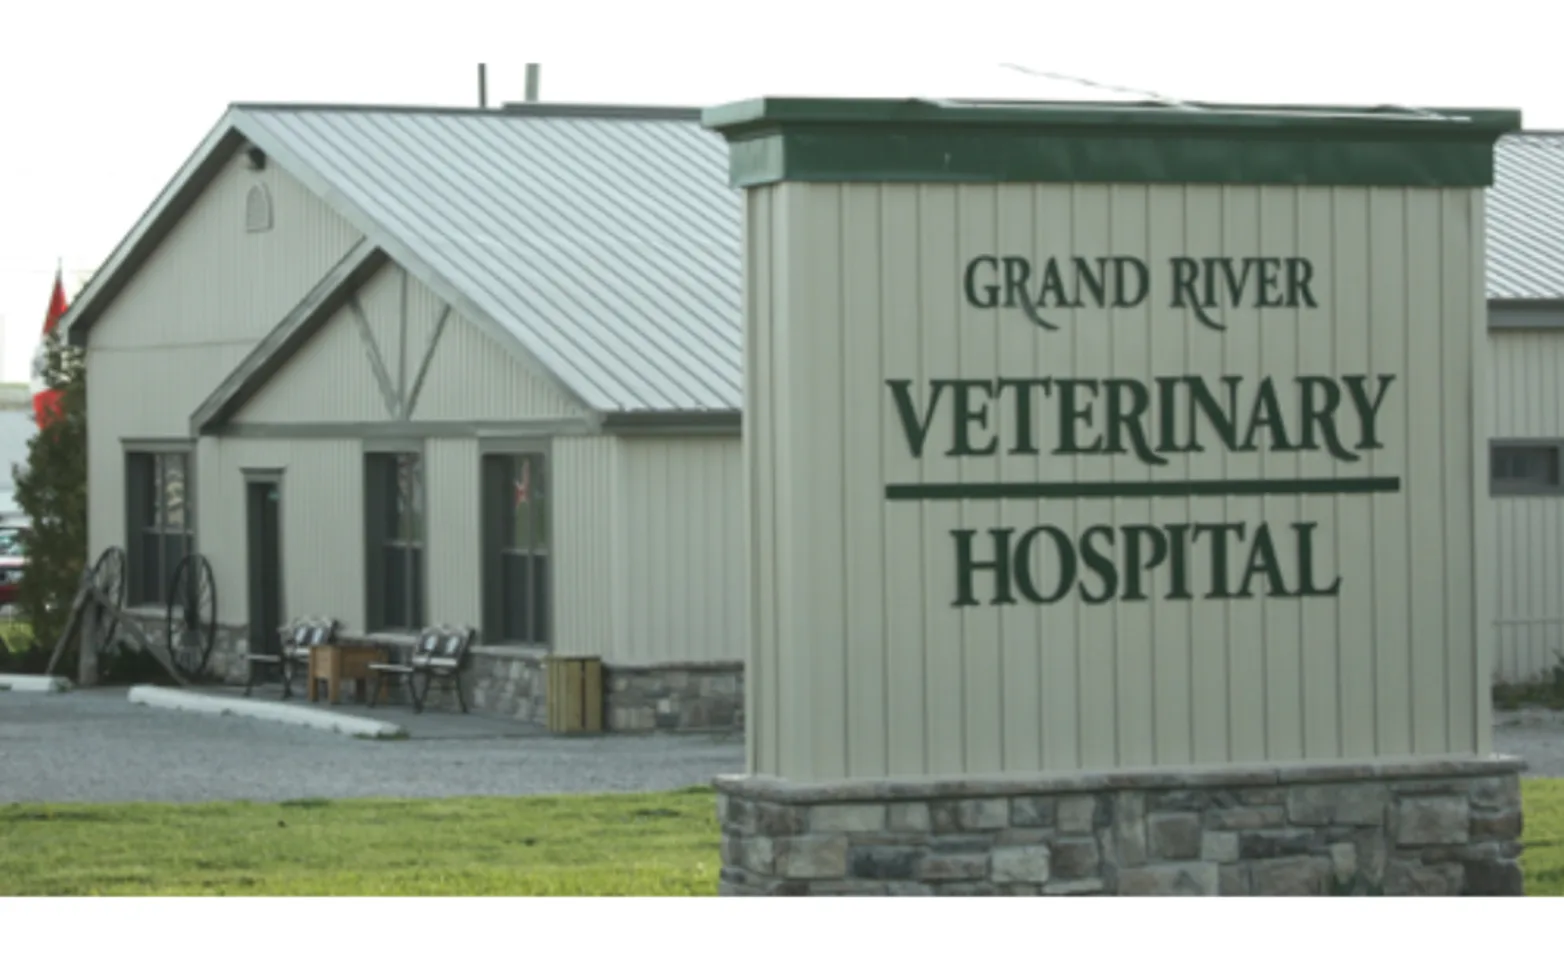 Exterior of Grand River Veterinary Hospital with sign